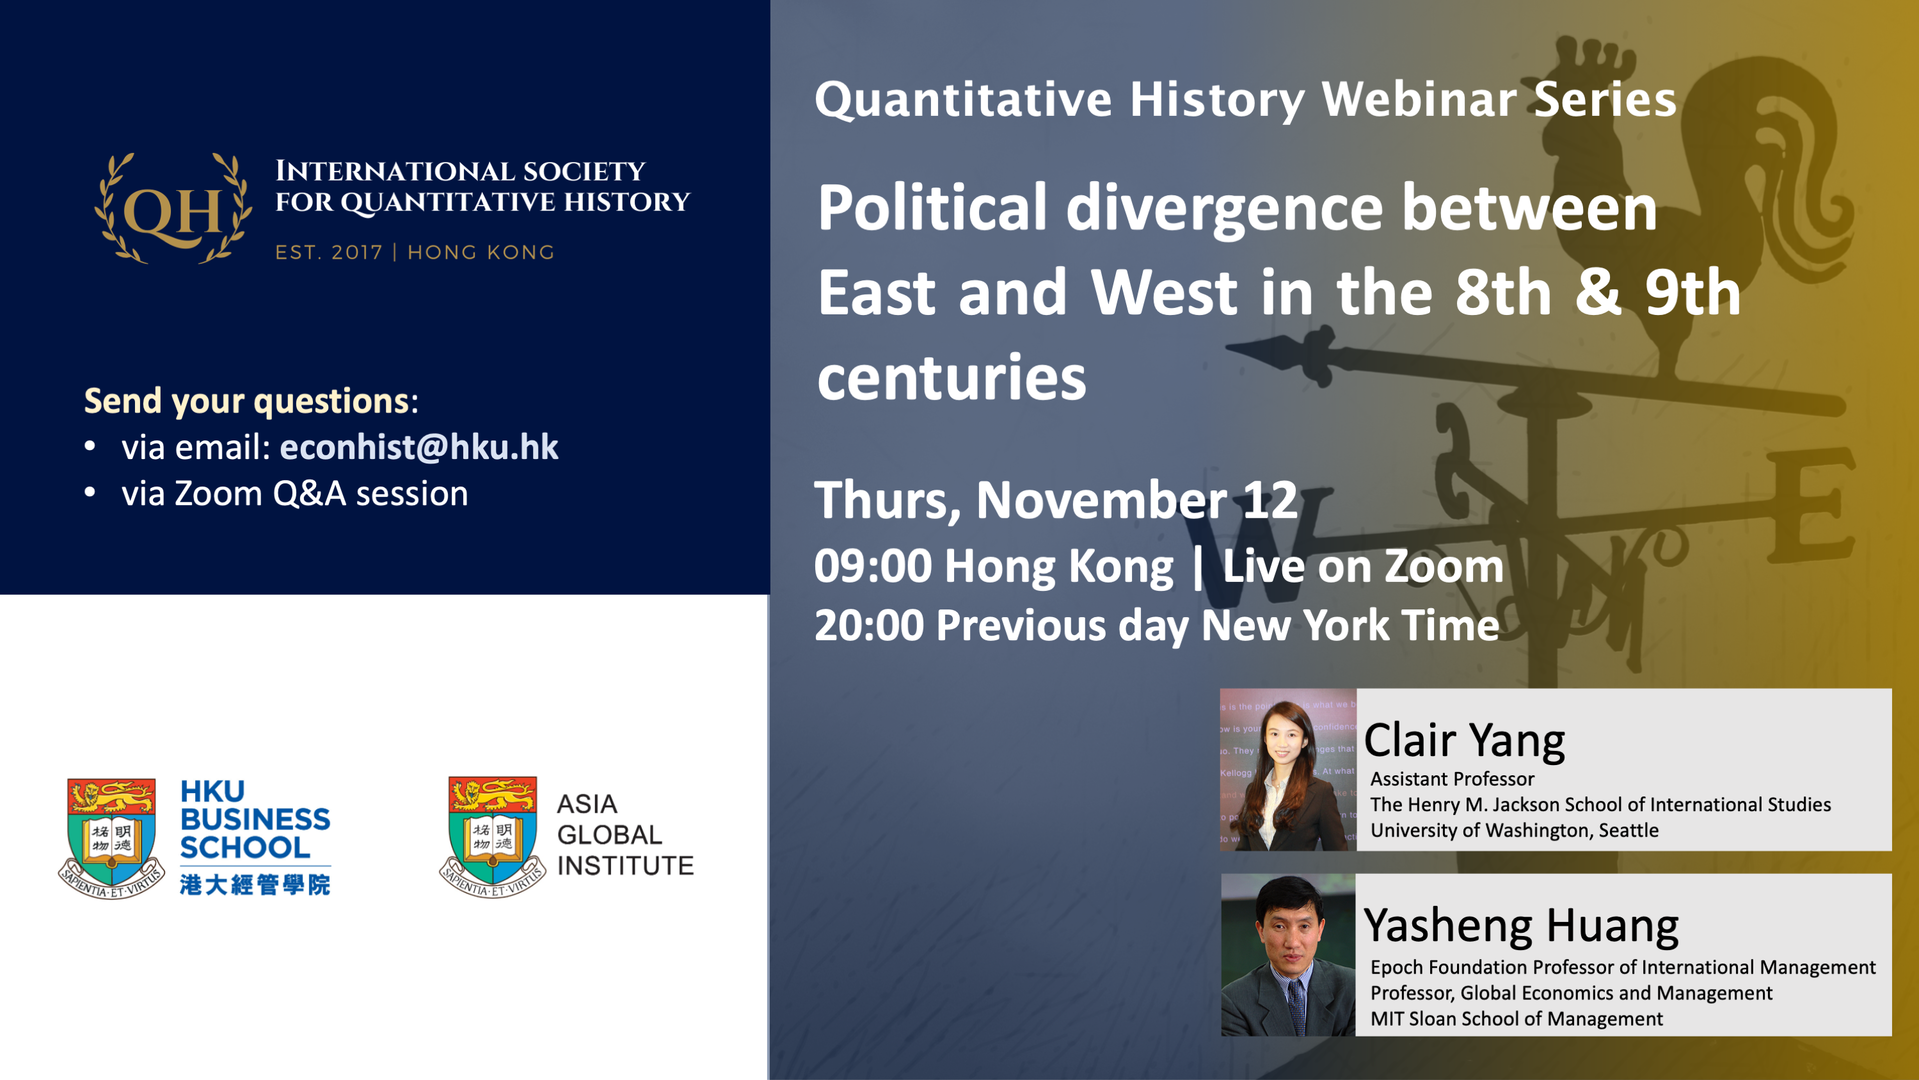 Quantitative History Webinar Series - Political divergence between East and West in the 8th & 9th centuries [Clair Yang and Yasheng Huang]